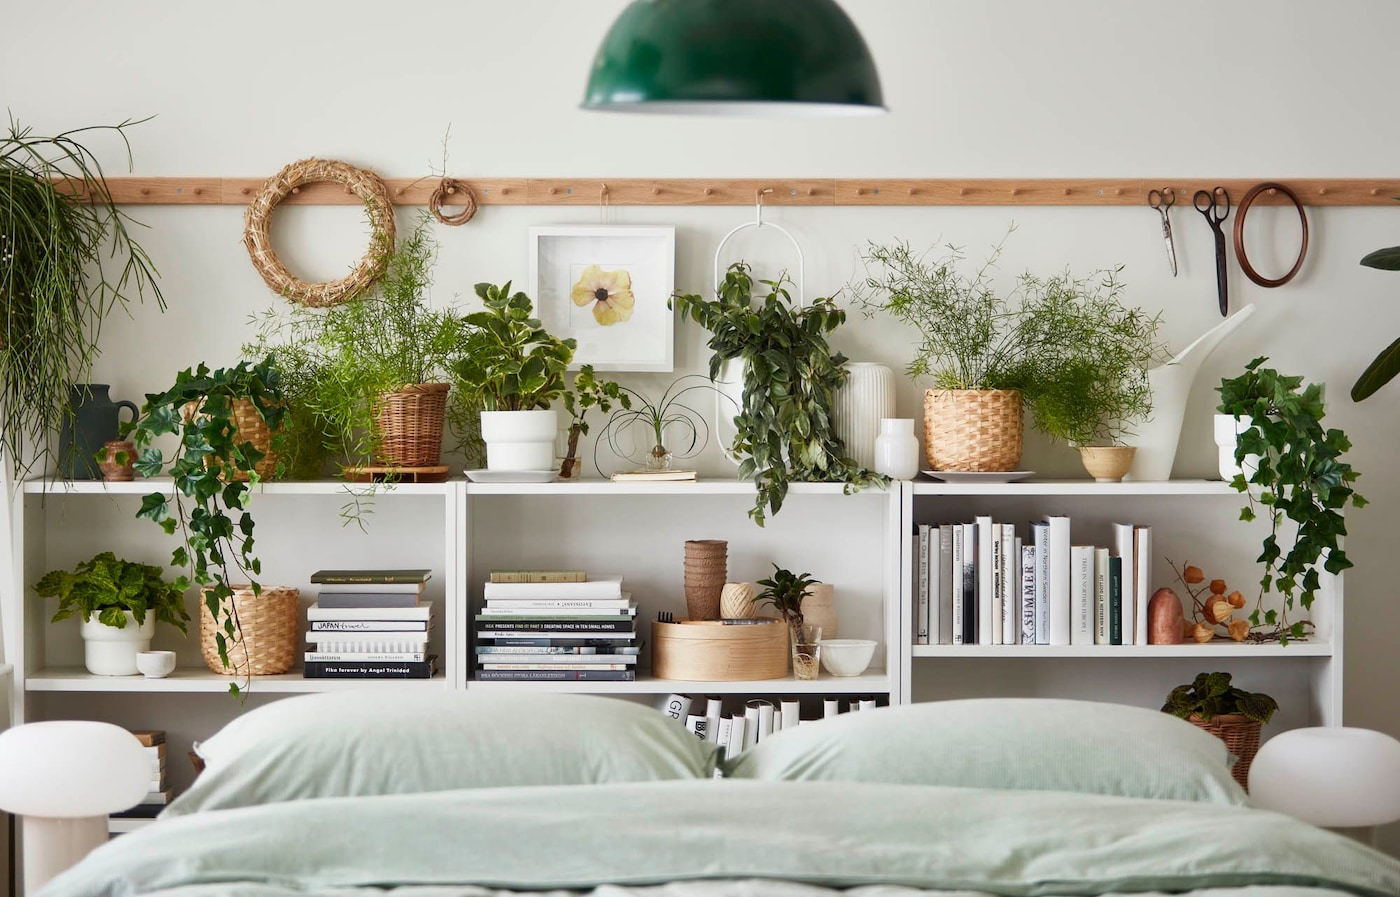 A bedroom with a bed in front of a white shelving unit holding books, plants, boxes and other decorations set against a wall.